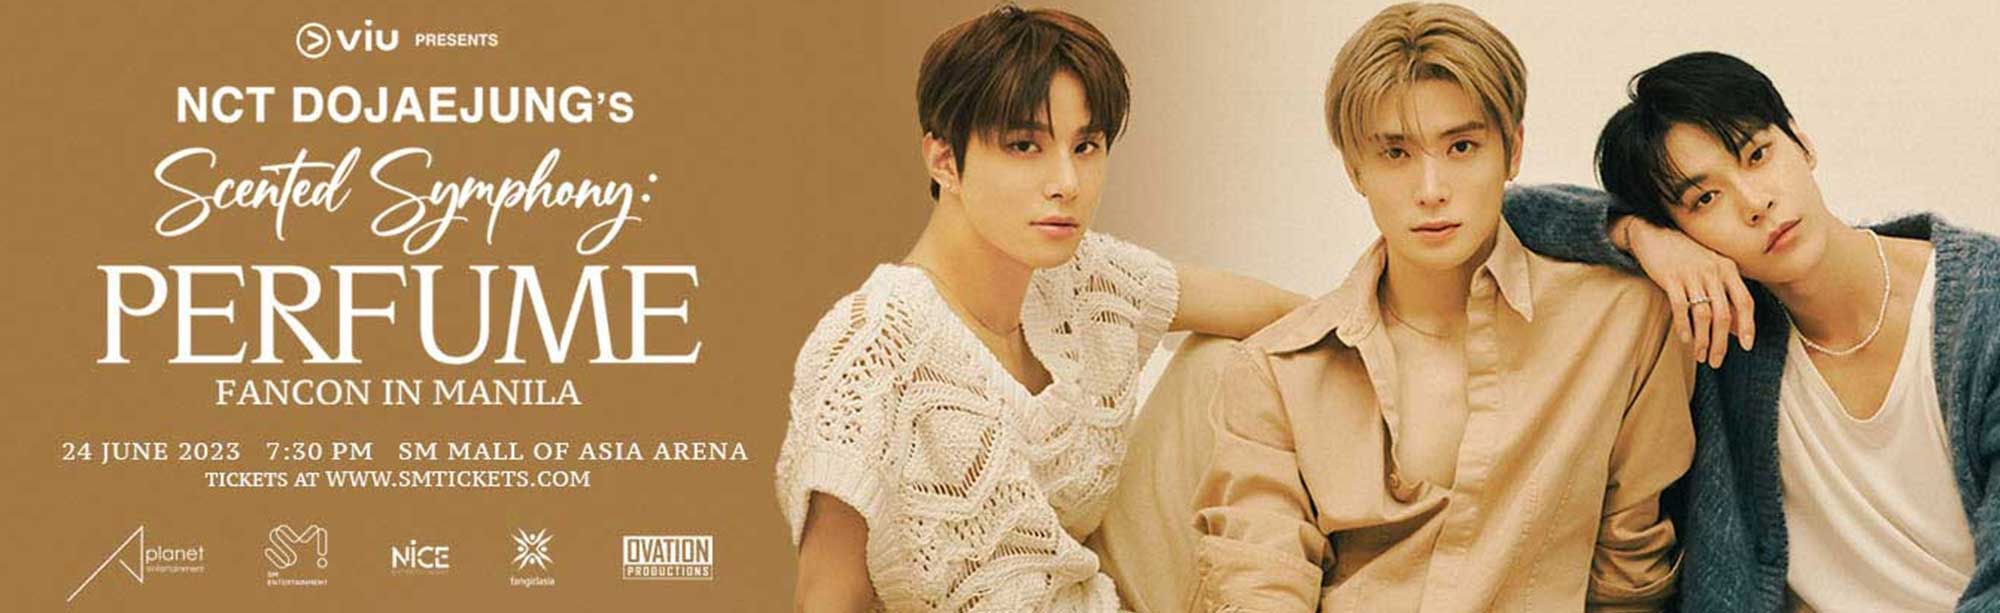 NCT DoJaeJung's Scented Symphony: PERFUME Fan Concert! 